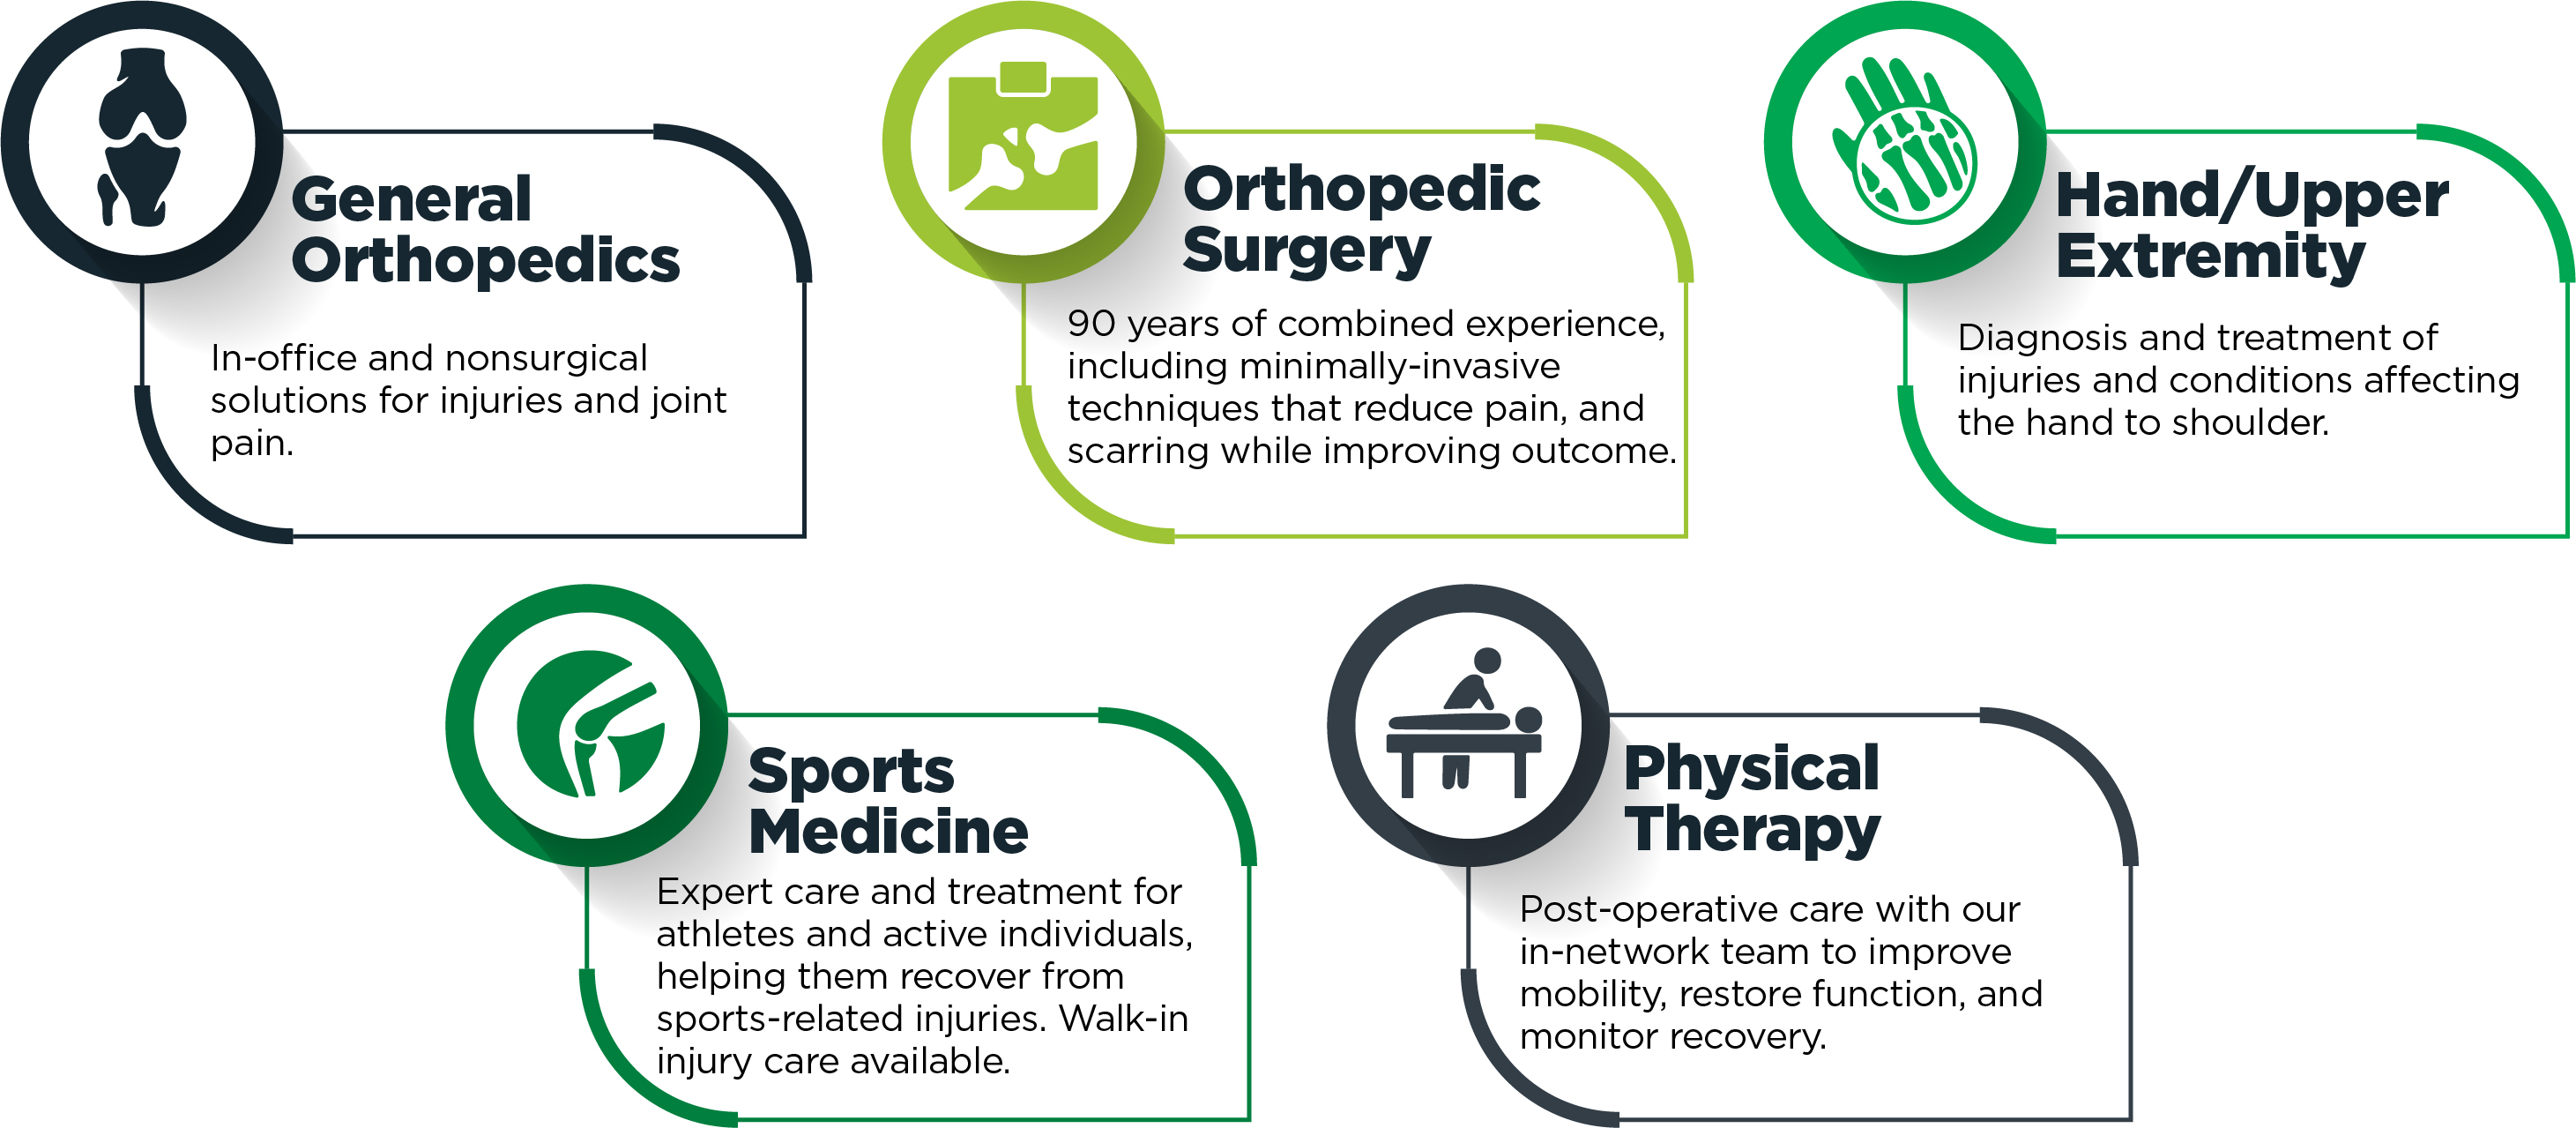 Graphic indicating how five orthopedic specialties work together